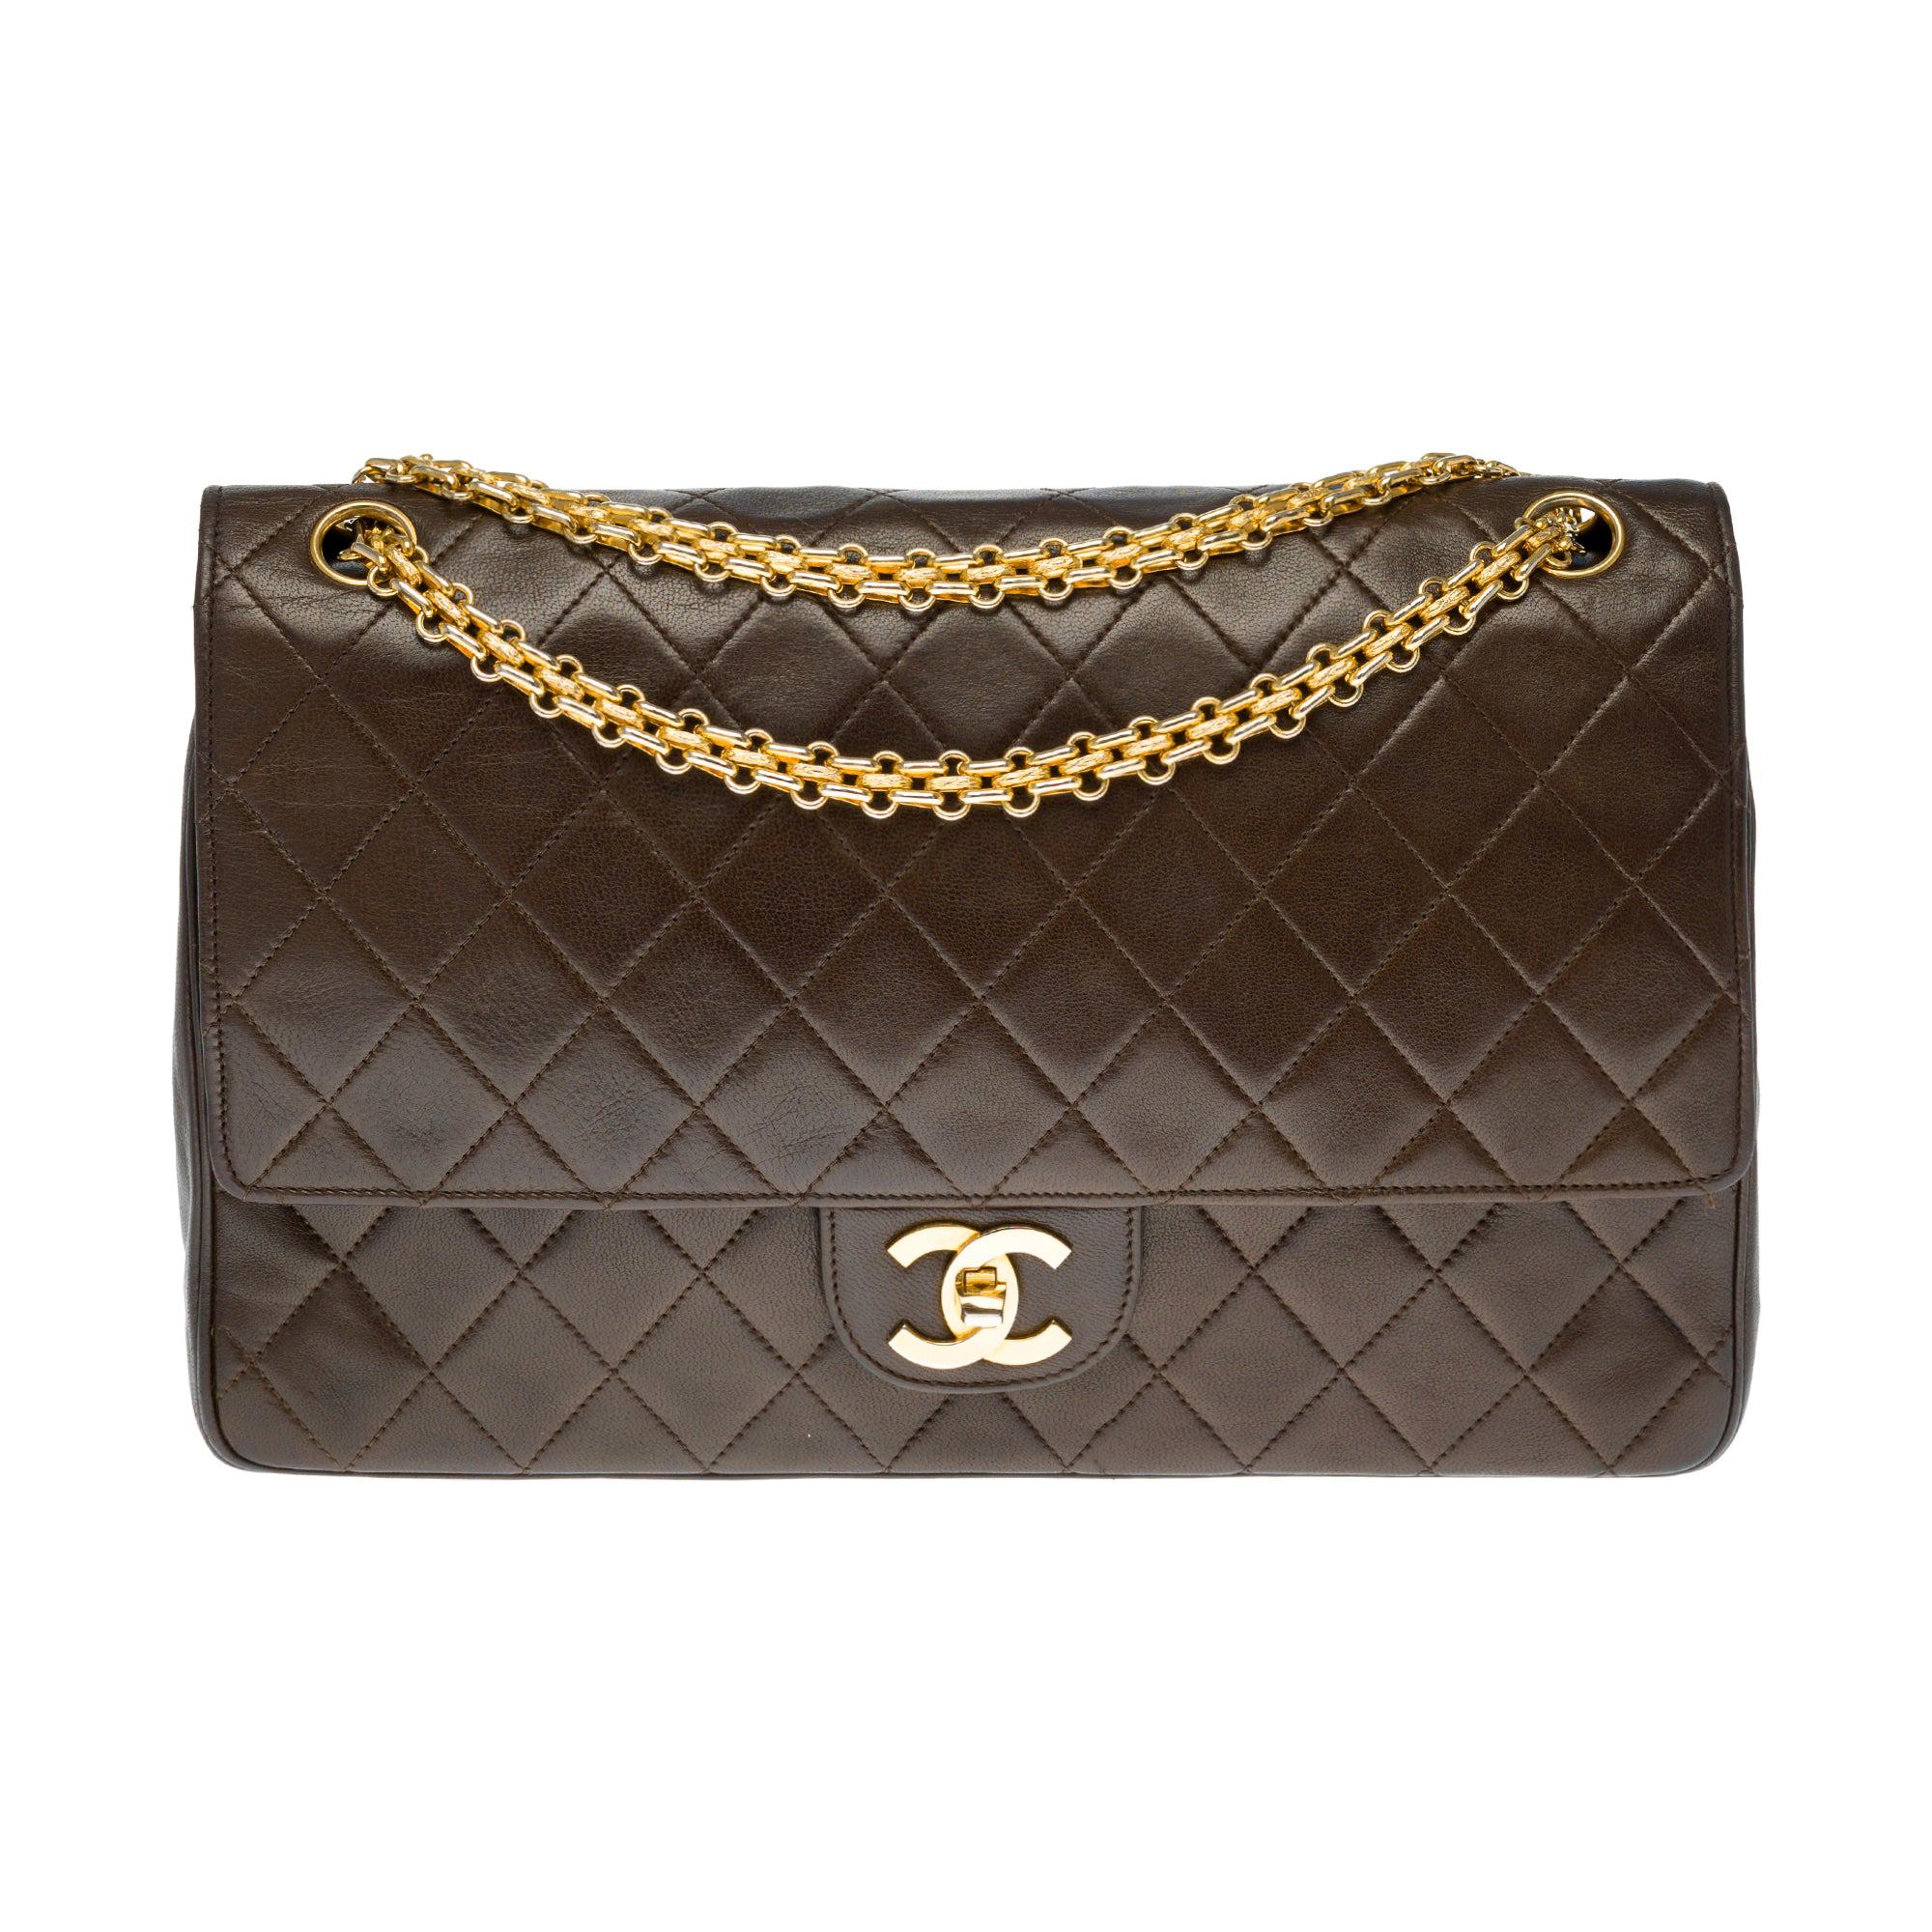 Chanel Classic 27cm shoulder bag in brown quilted lambskin and gold hardware